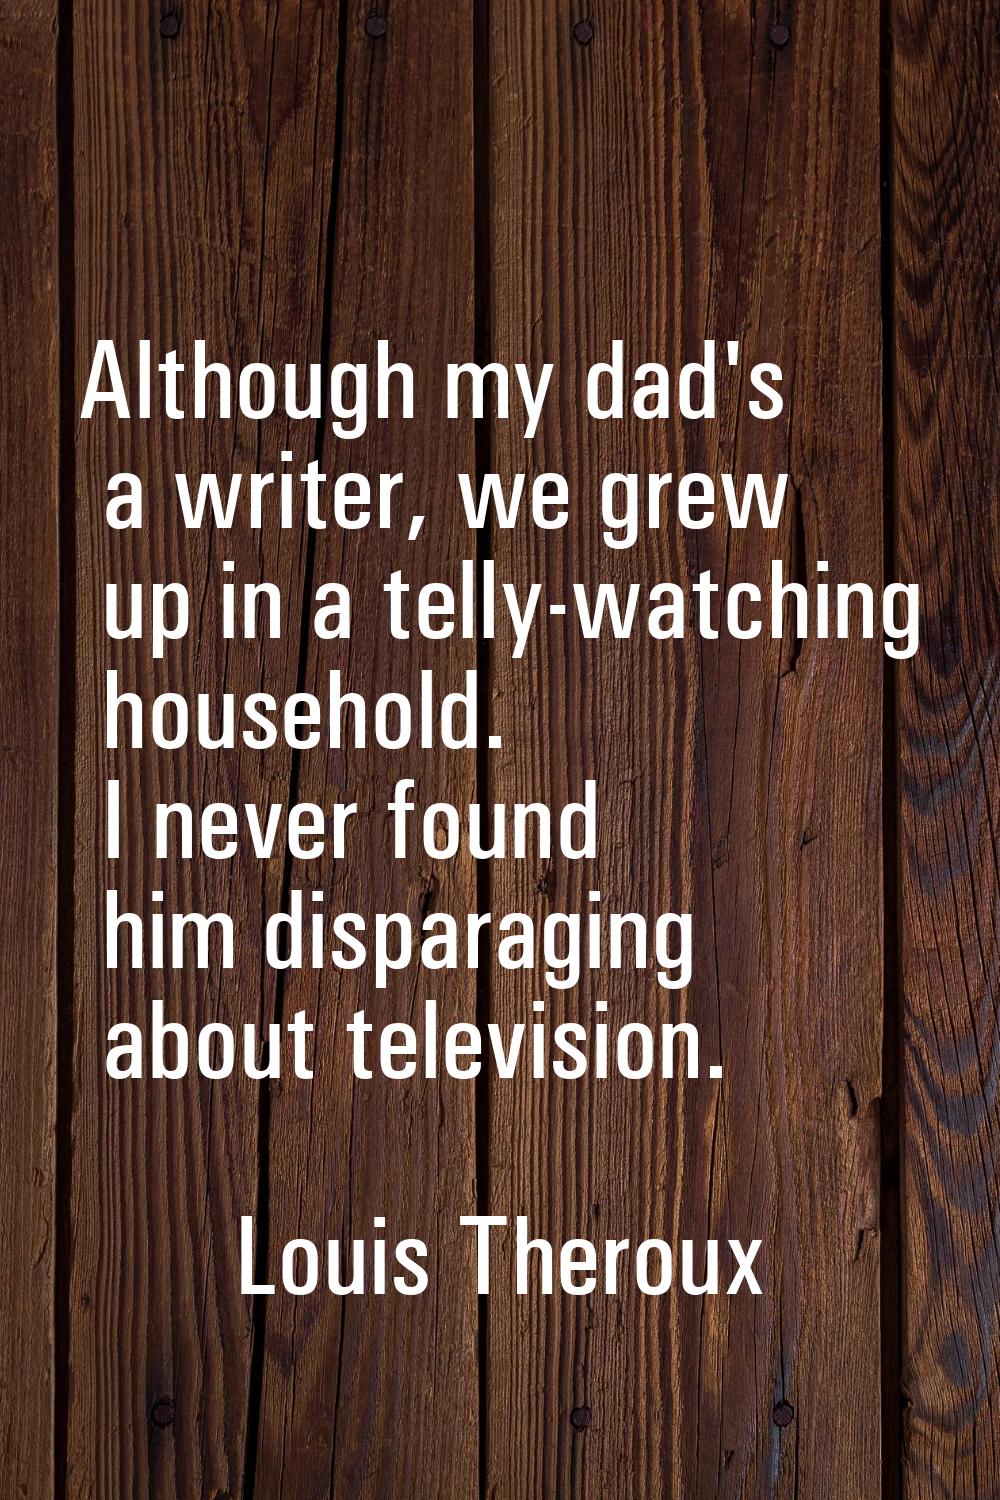 Although my dad's a writer, we grew up in a telly-watching household. I never found him disparaging